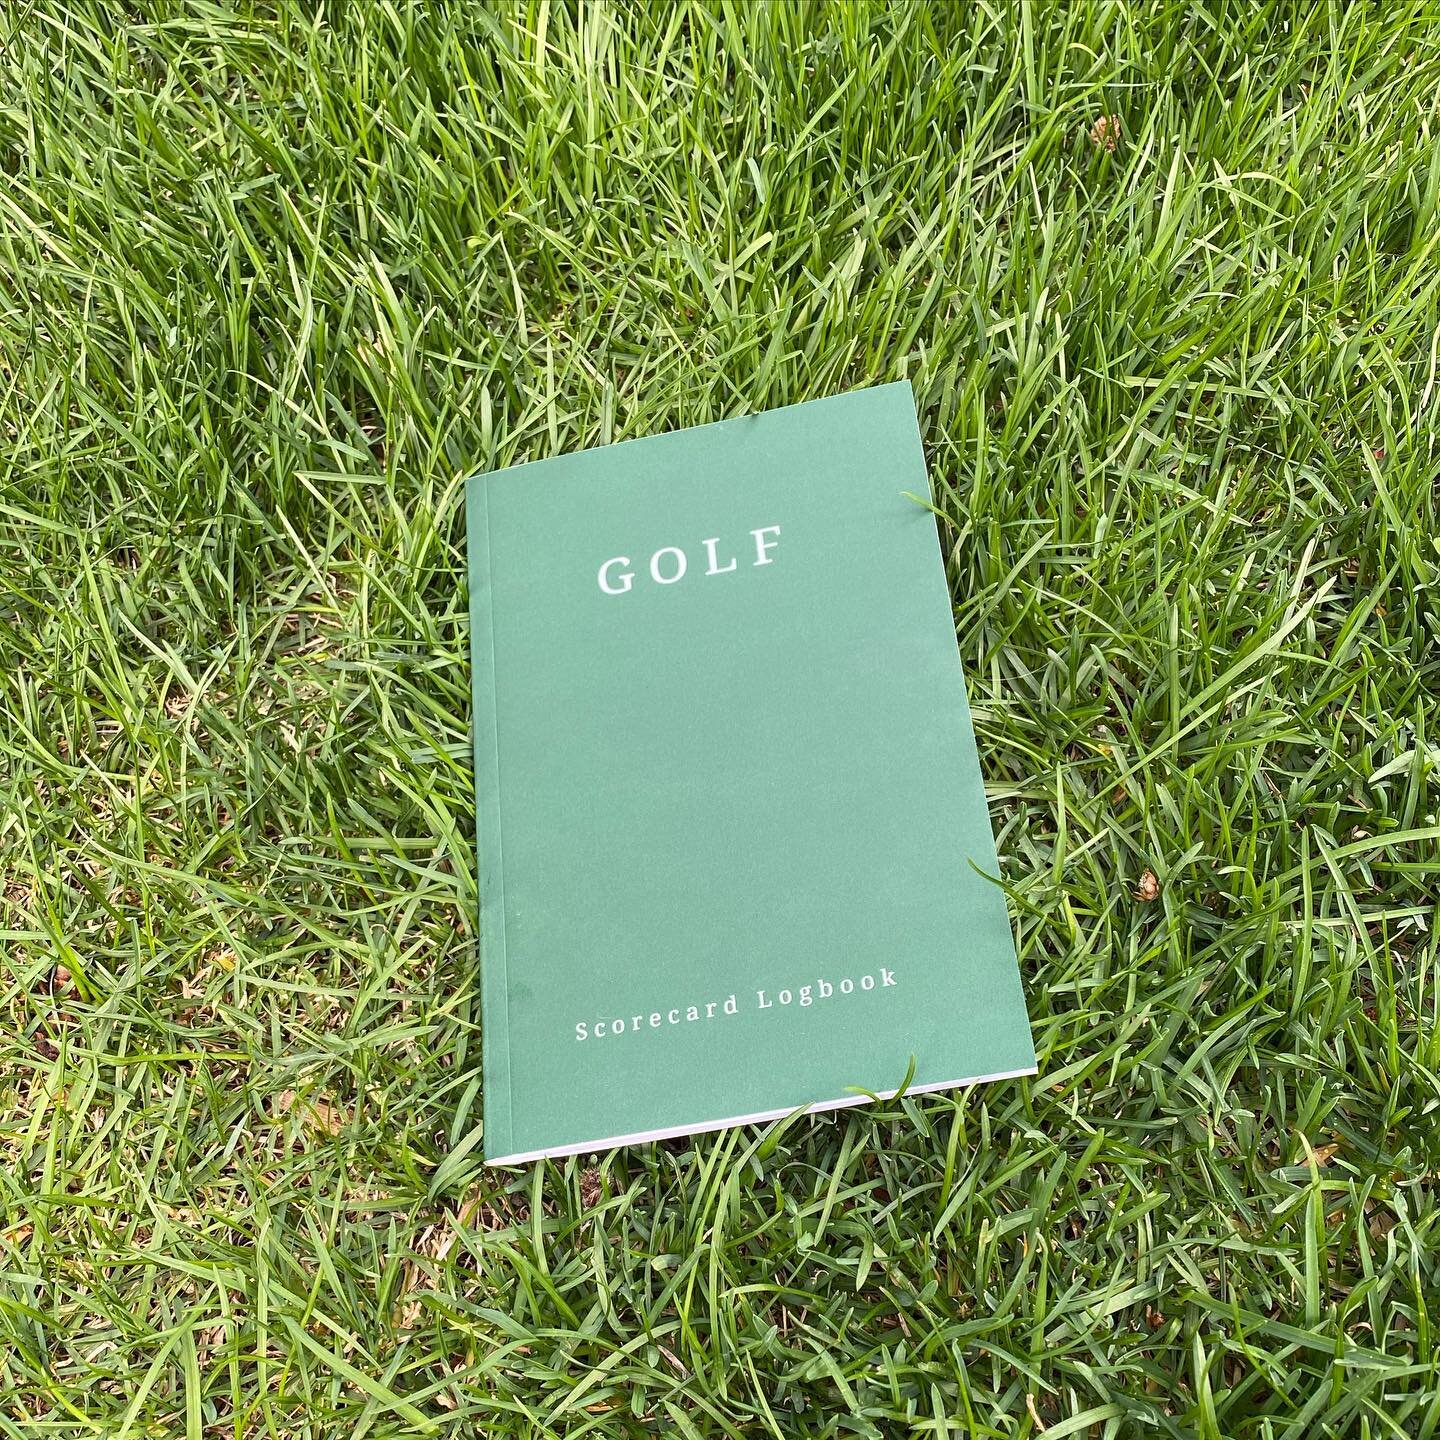 For the golf lover in your life ⛳️ 

Give them the ability to document their rounds throughout the summer! 

Link in bio to purchase